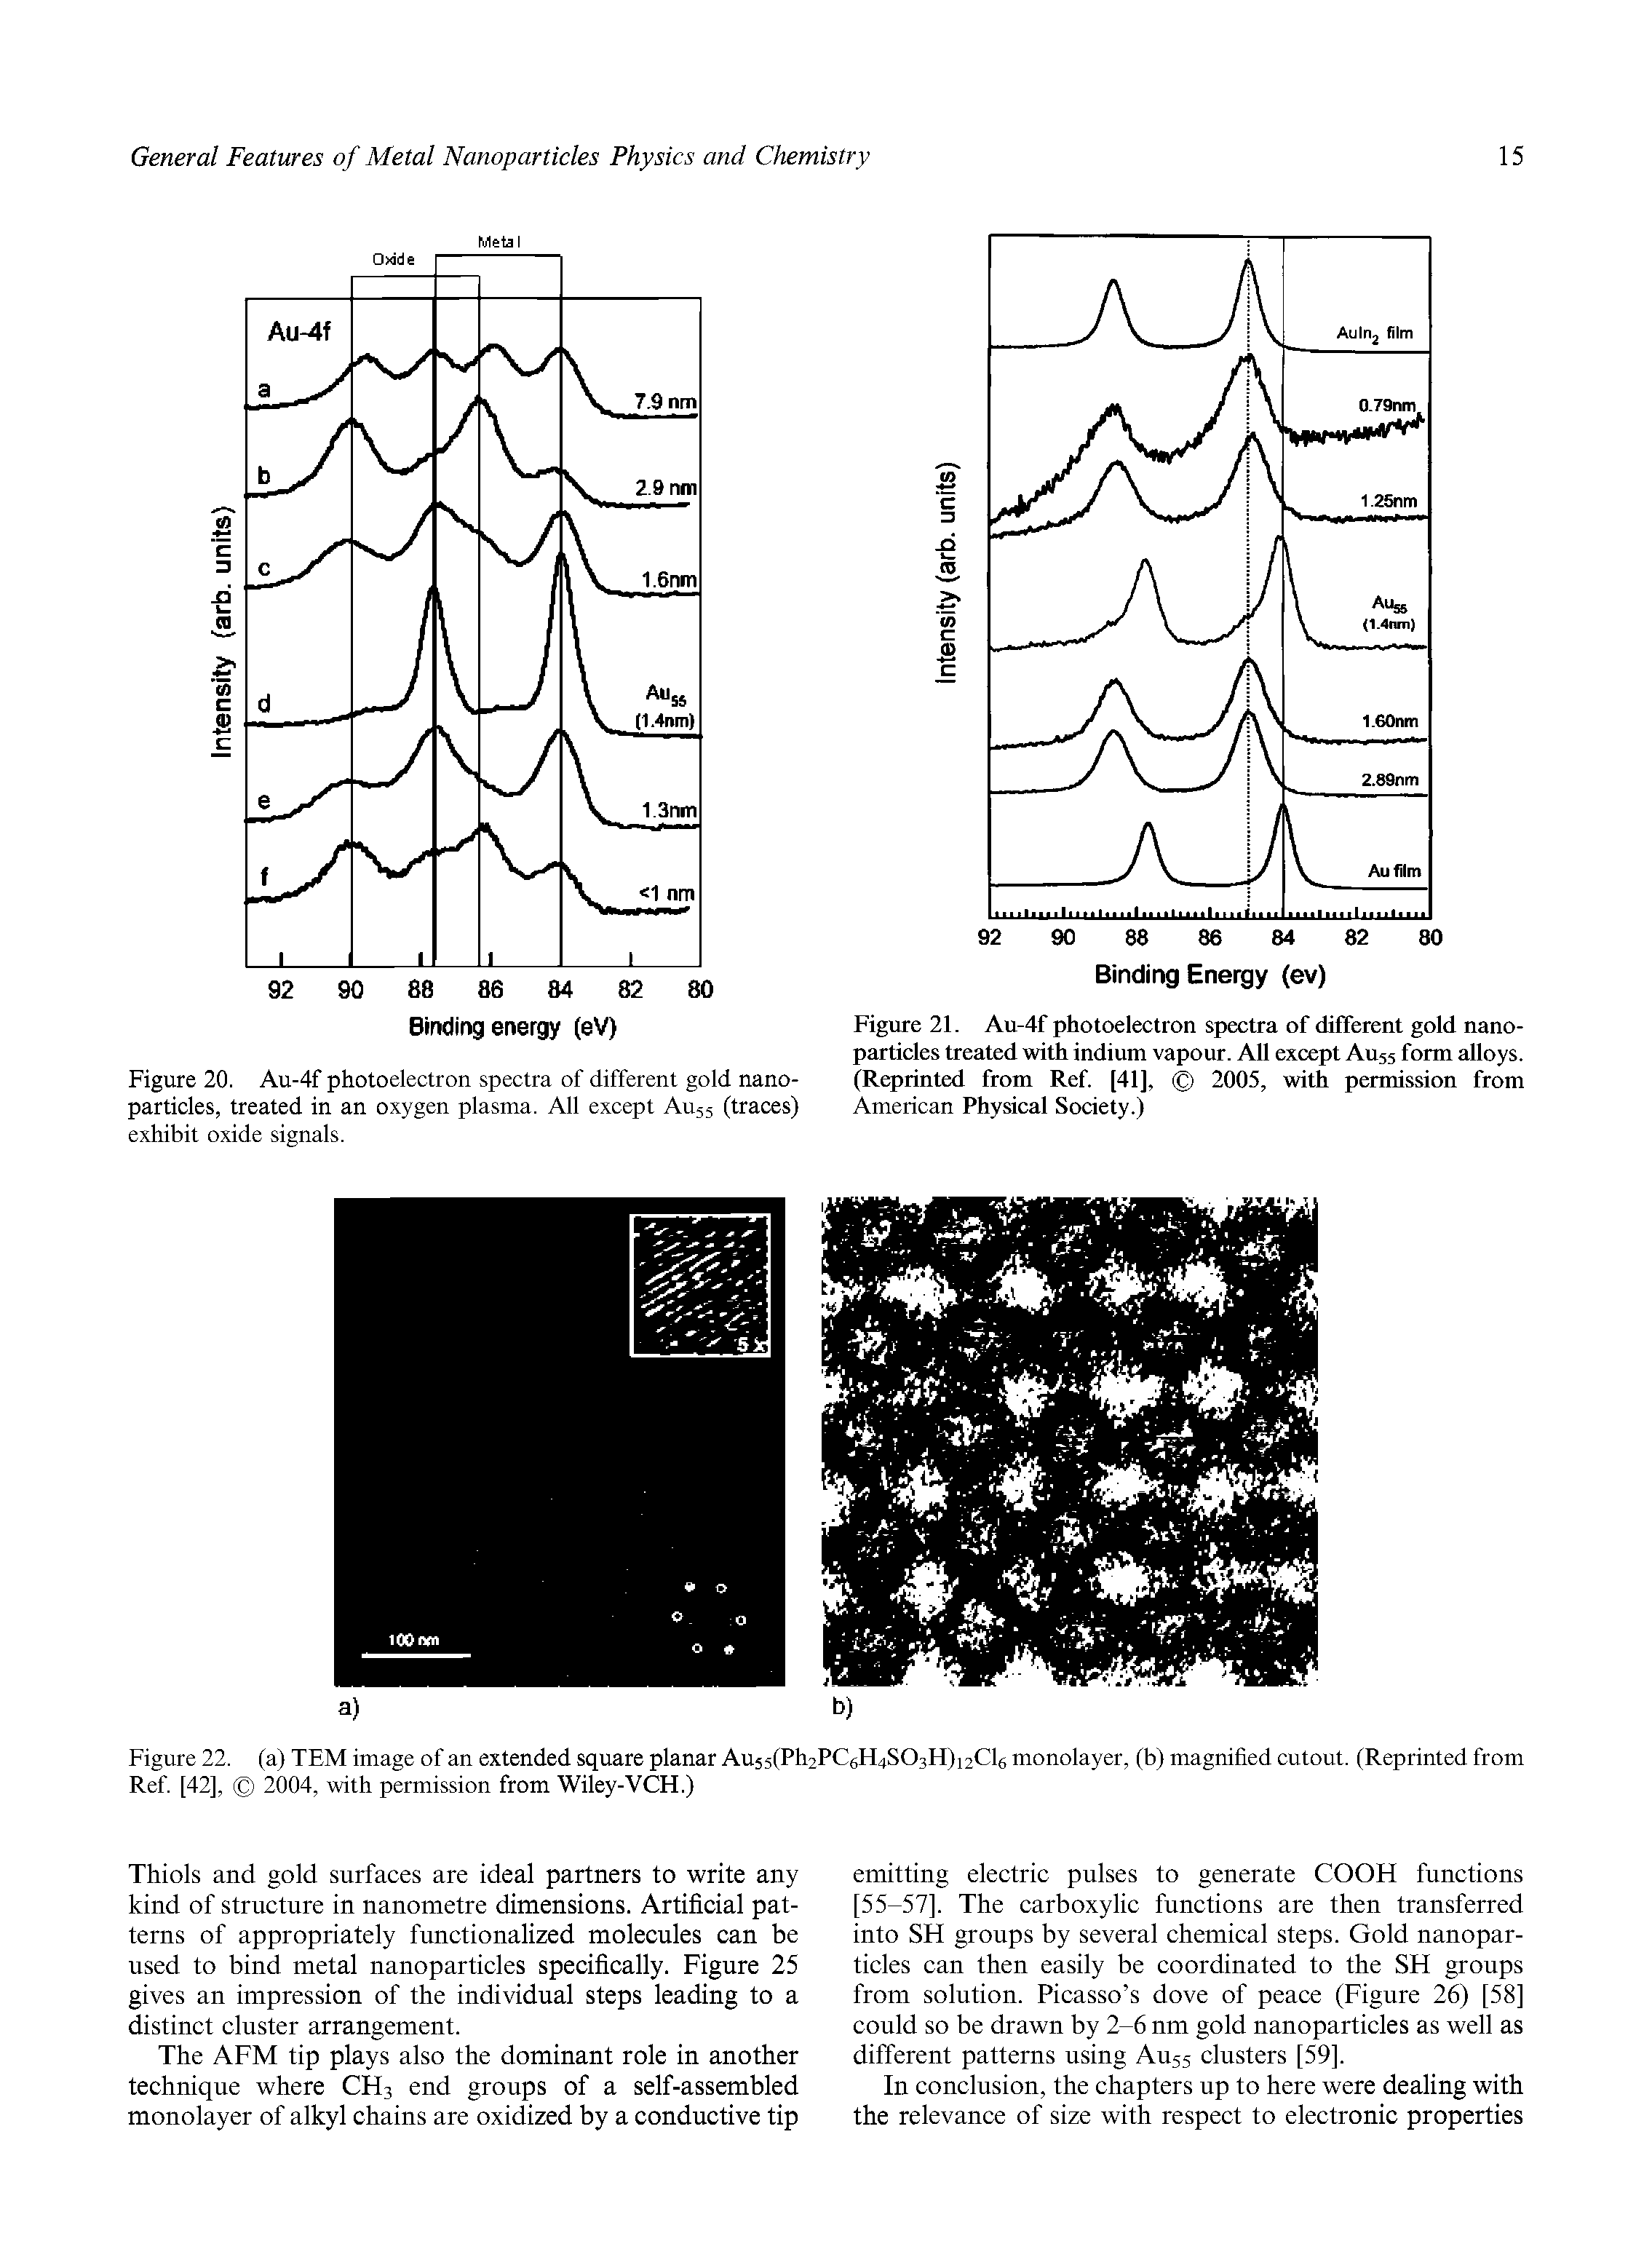 Figure 20. Au-4f photoelectron spectra of different gold nanoparticles, treated in an oxygen plasma. All except AU55 (traces) exhibit oxide signals.